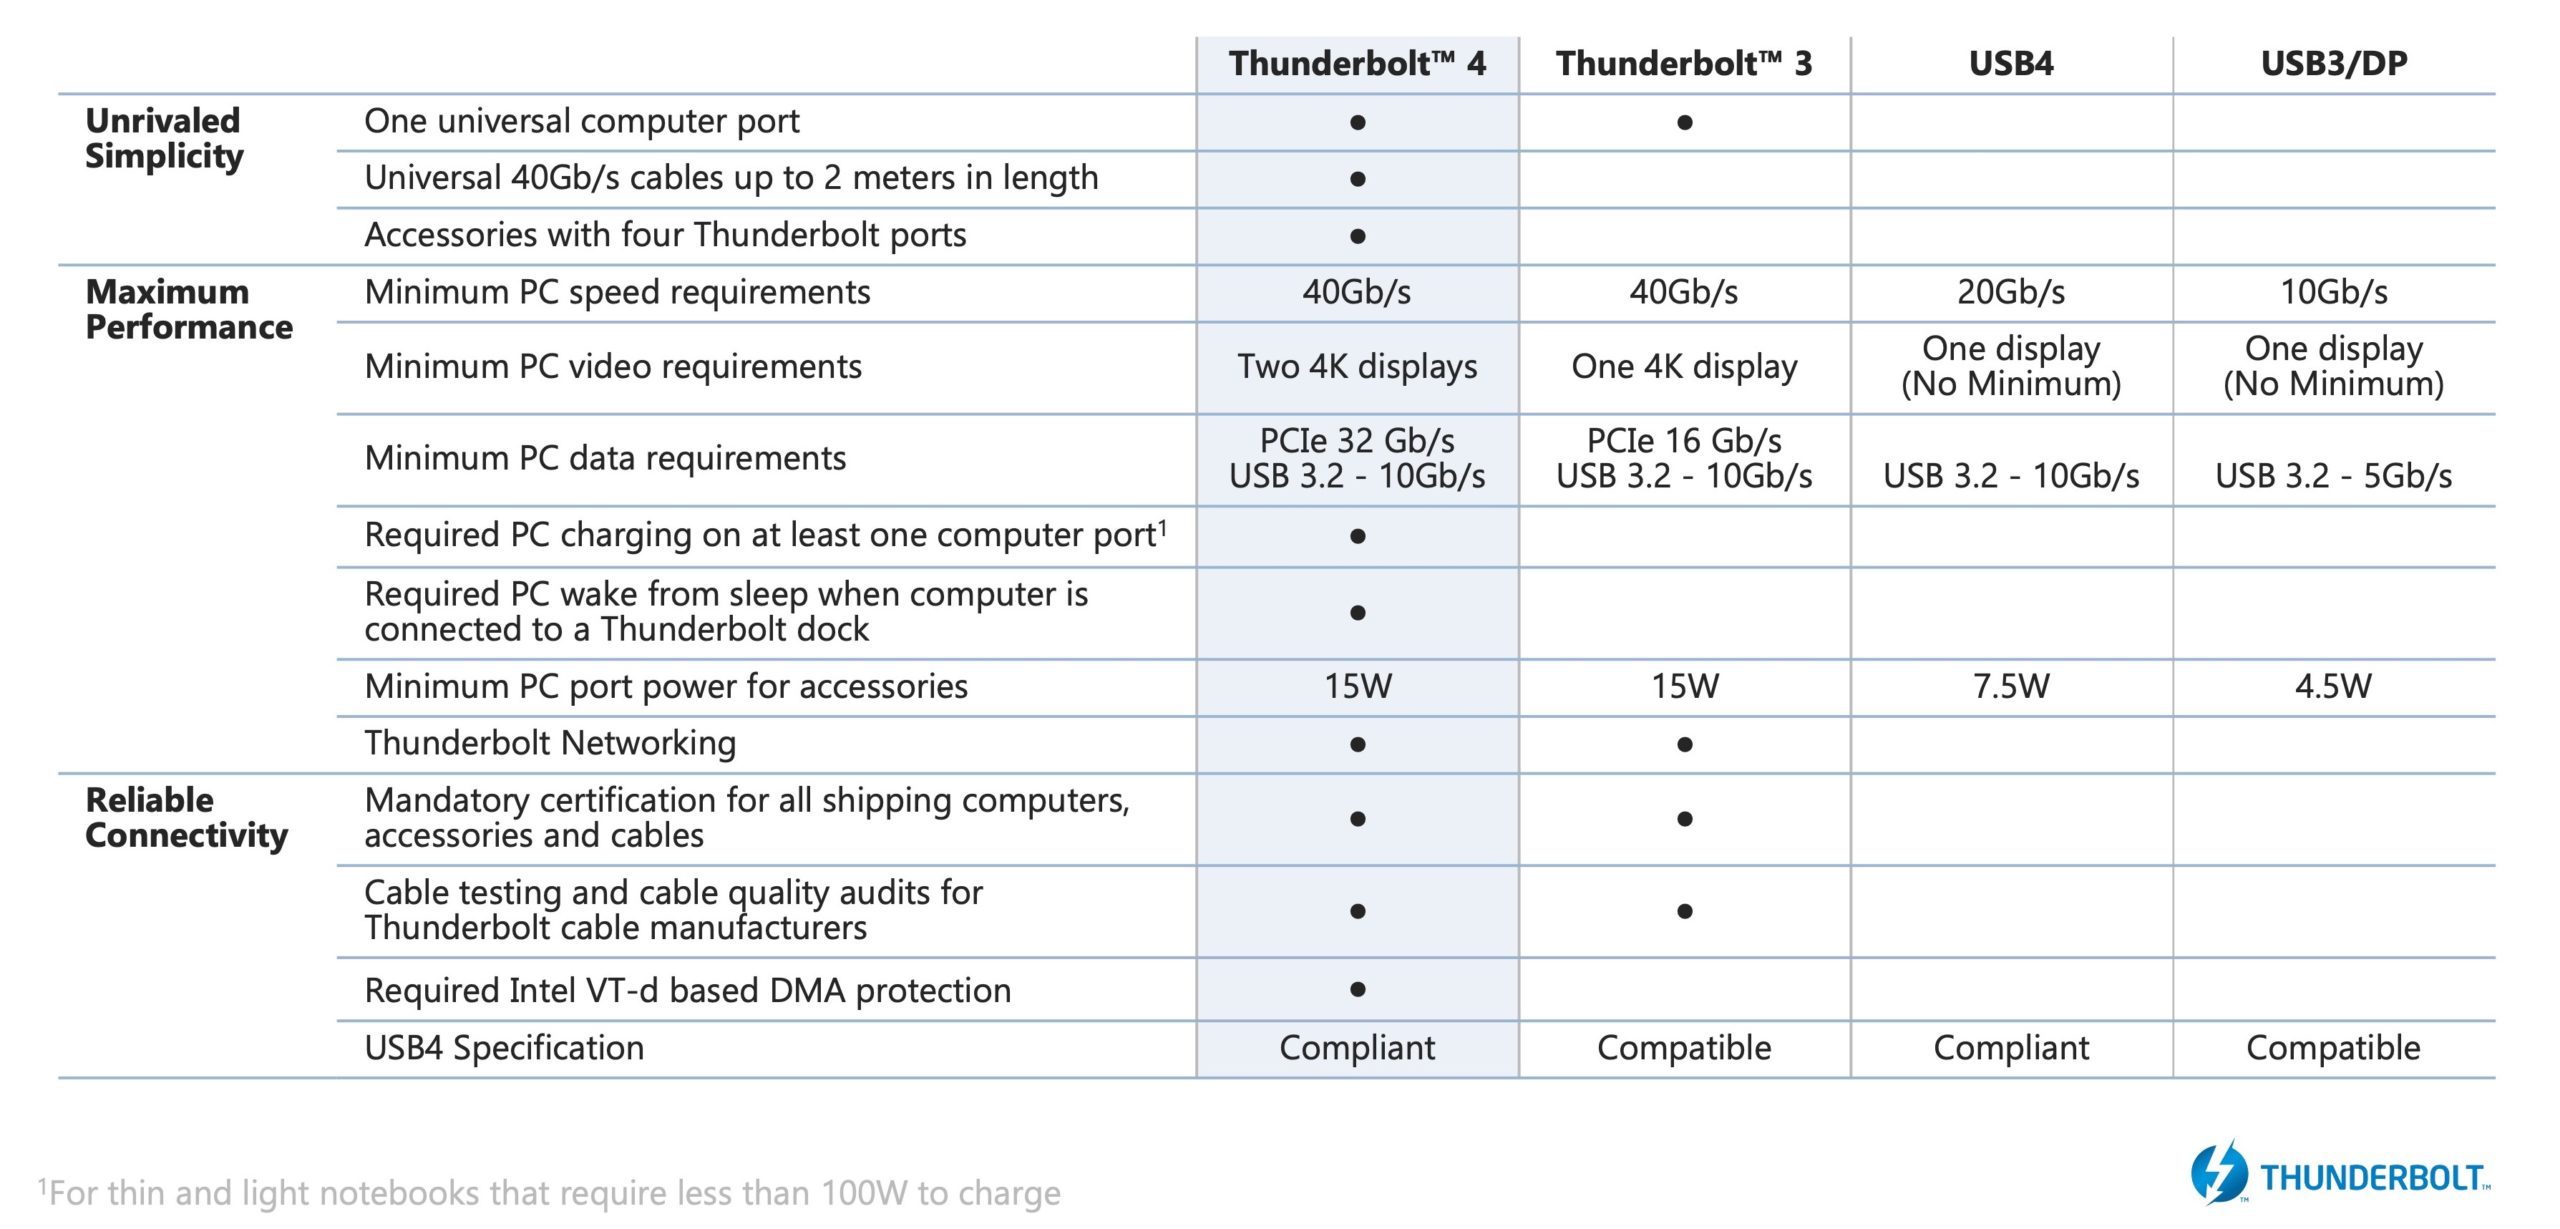 Thunderbolt vs. USB, HDMI, PCIe Cable: How does it compare? - CNET